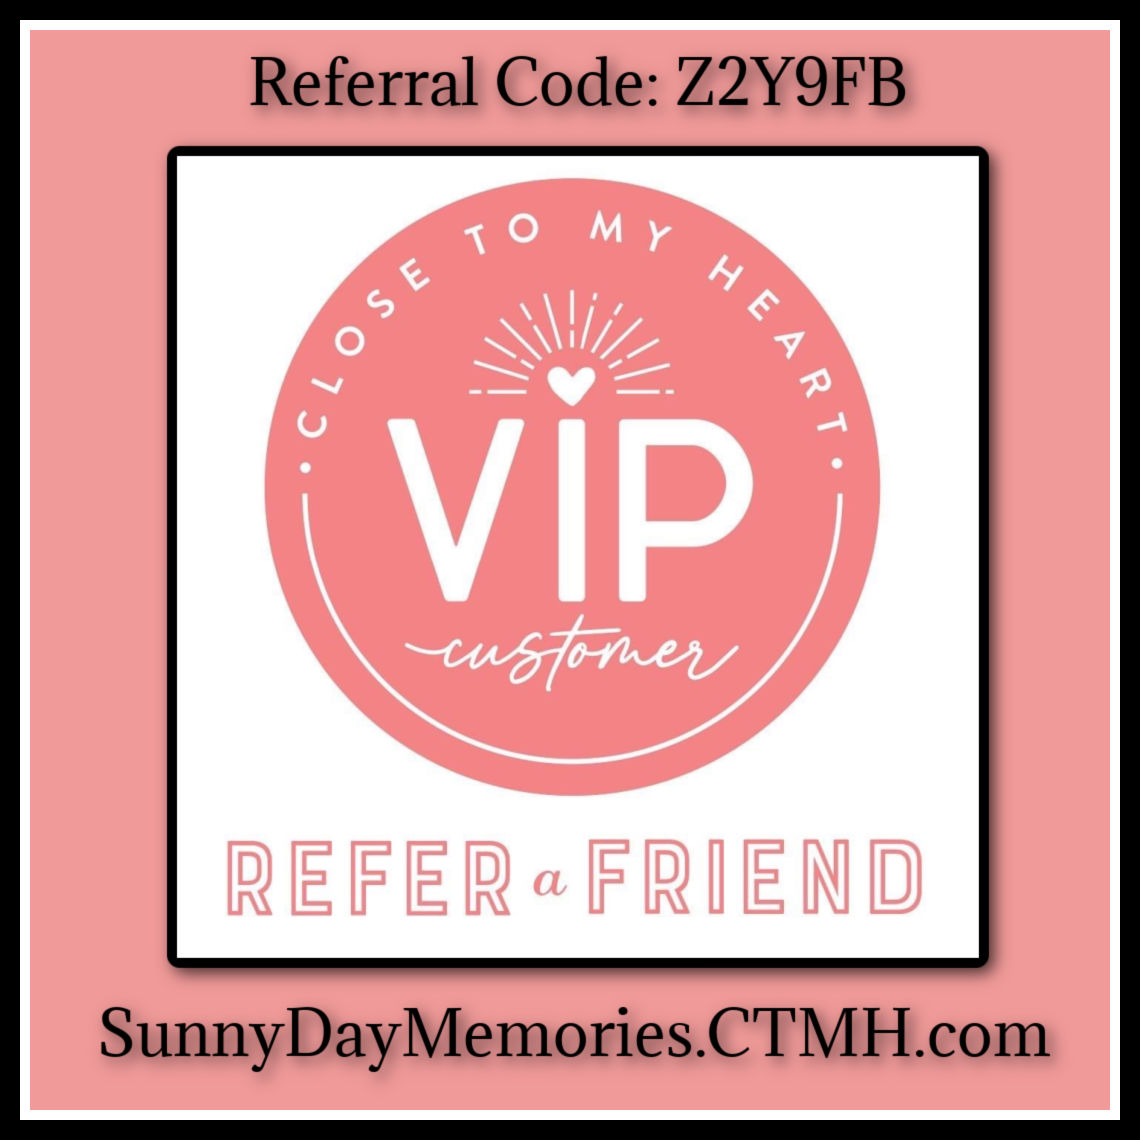 CTMH VIP Refer a Friend Promotion